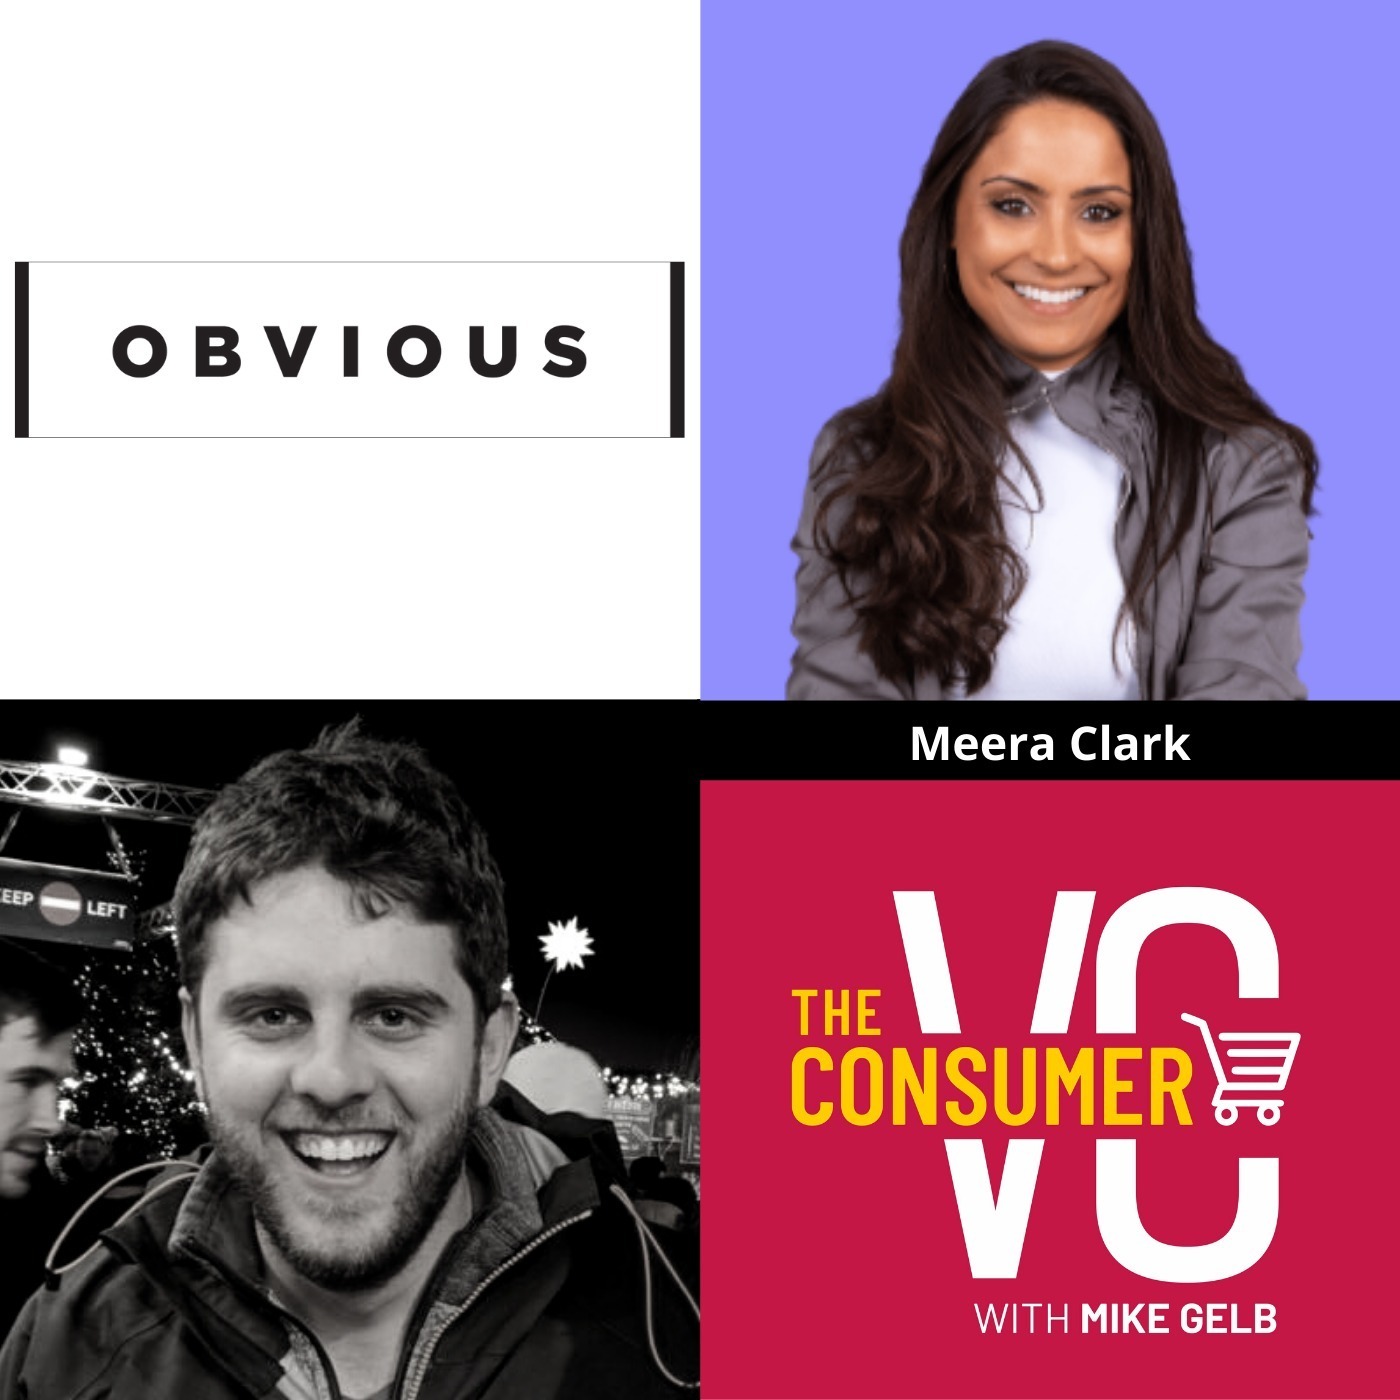 Meera Clark (Obvious Ventures) - How COVID led to a Crossroads in Healthy Habits, Milestones at Series A, and How She Thinks About Sustainability and Consumer Centric